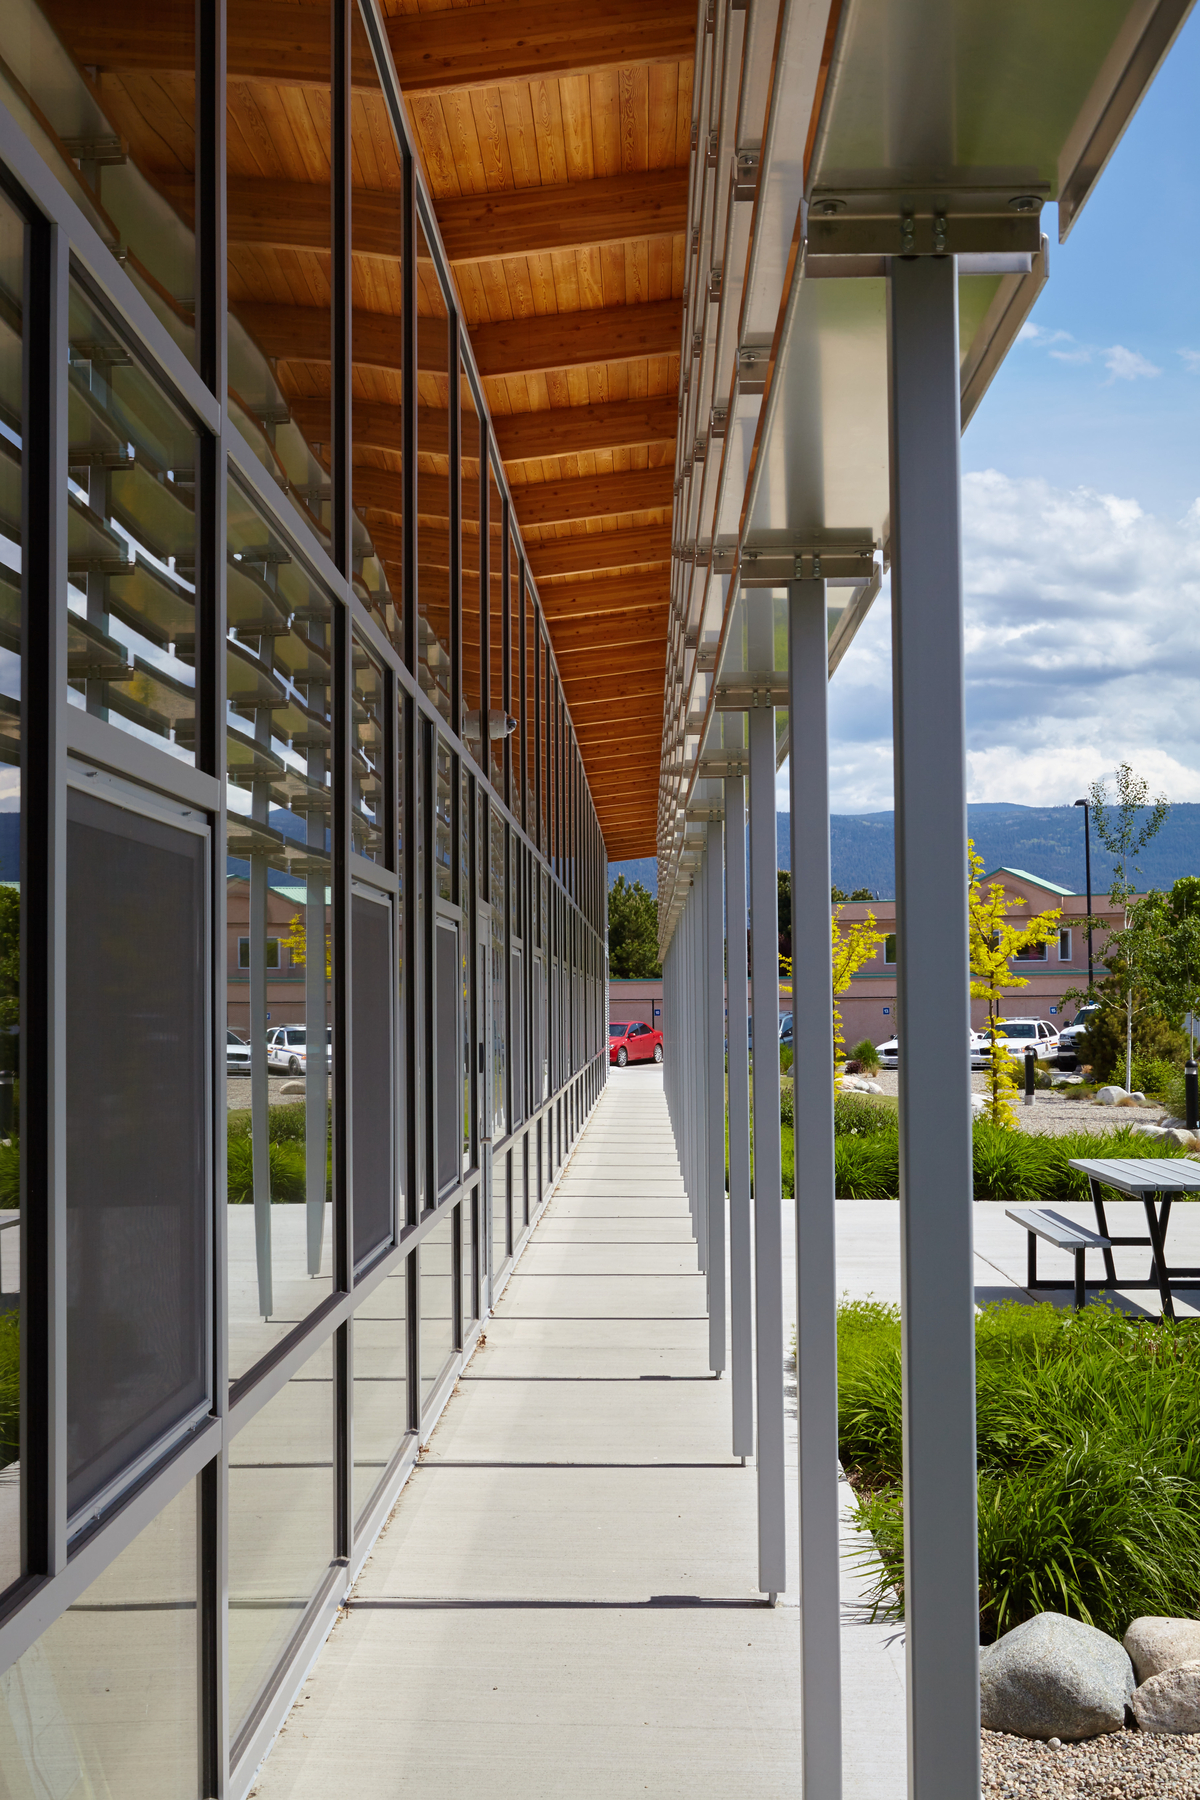 Exterior daytime view of Summerland RCMP Detachment highlighting glue-laminated timber (Glulam) beams supporting exterior soffits clad with unfinished pine planks